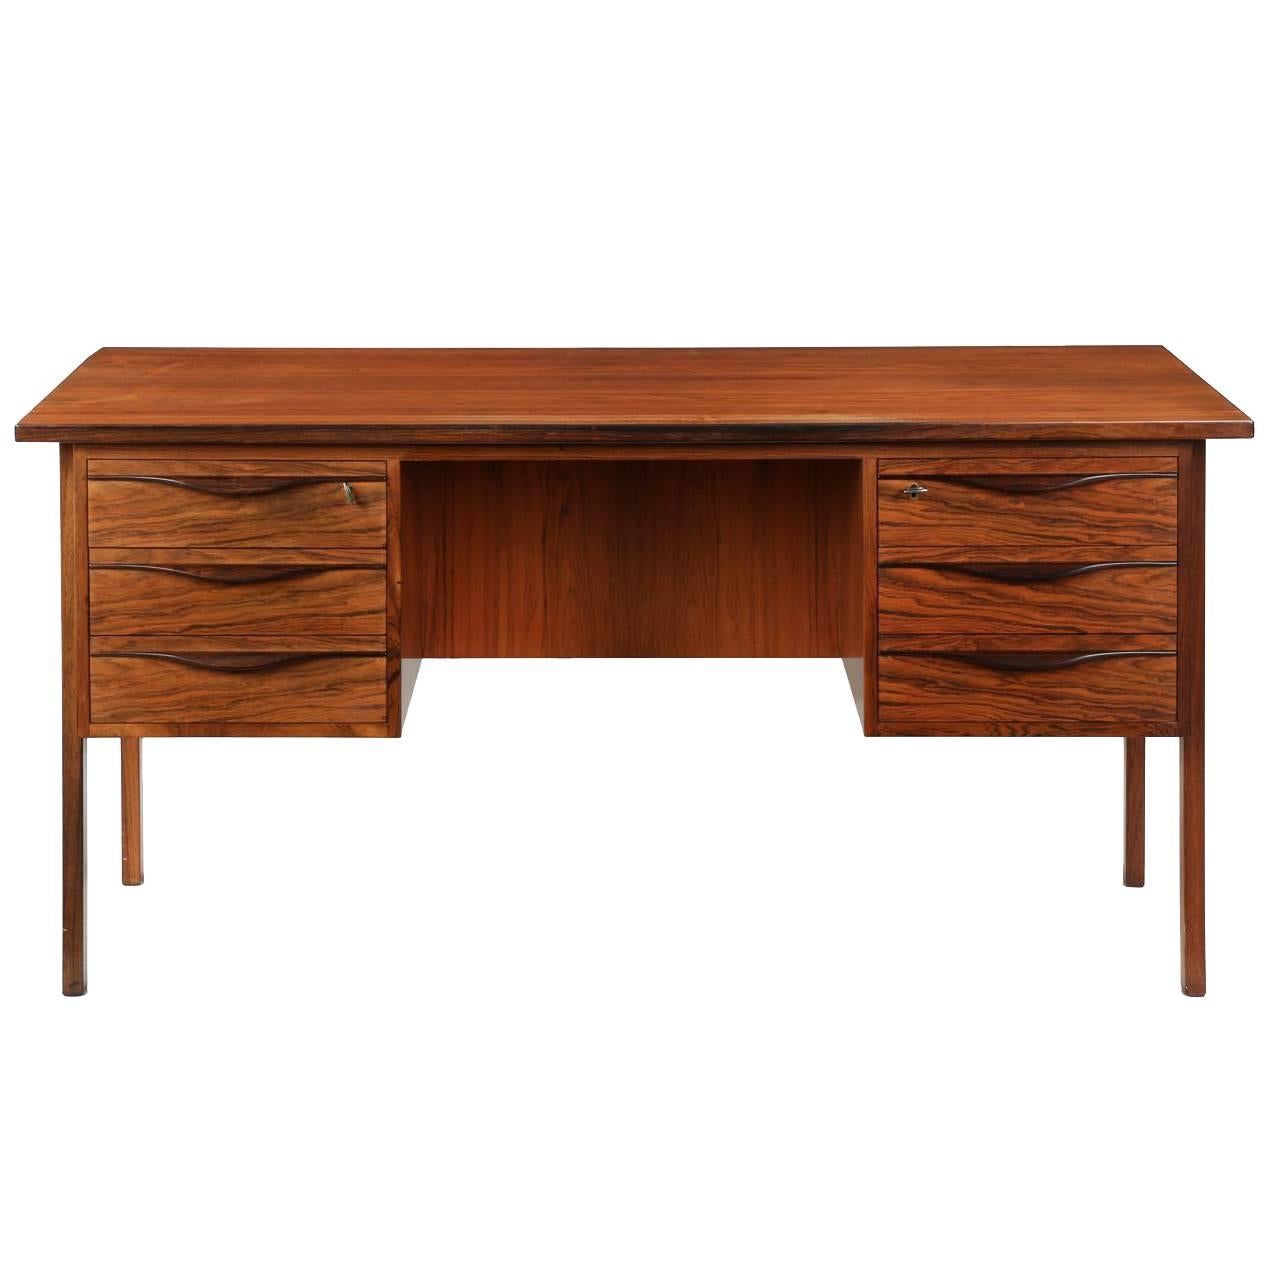 Danish Mid-Century Modern Rosewood Executive Desk with Hidden Compartment